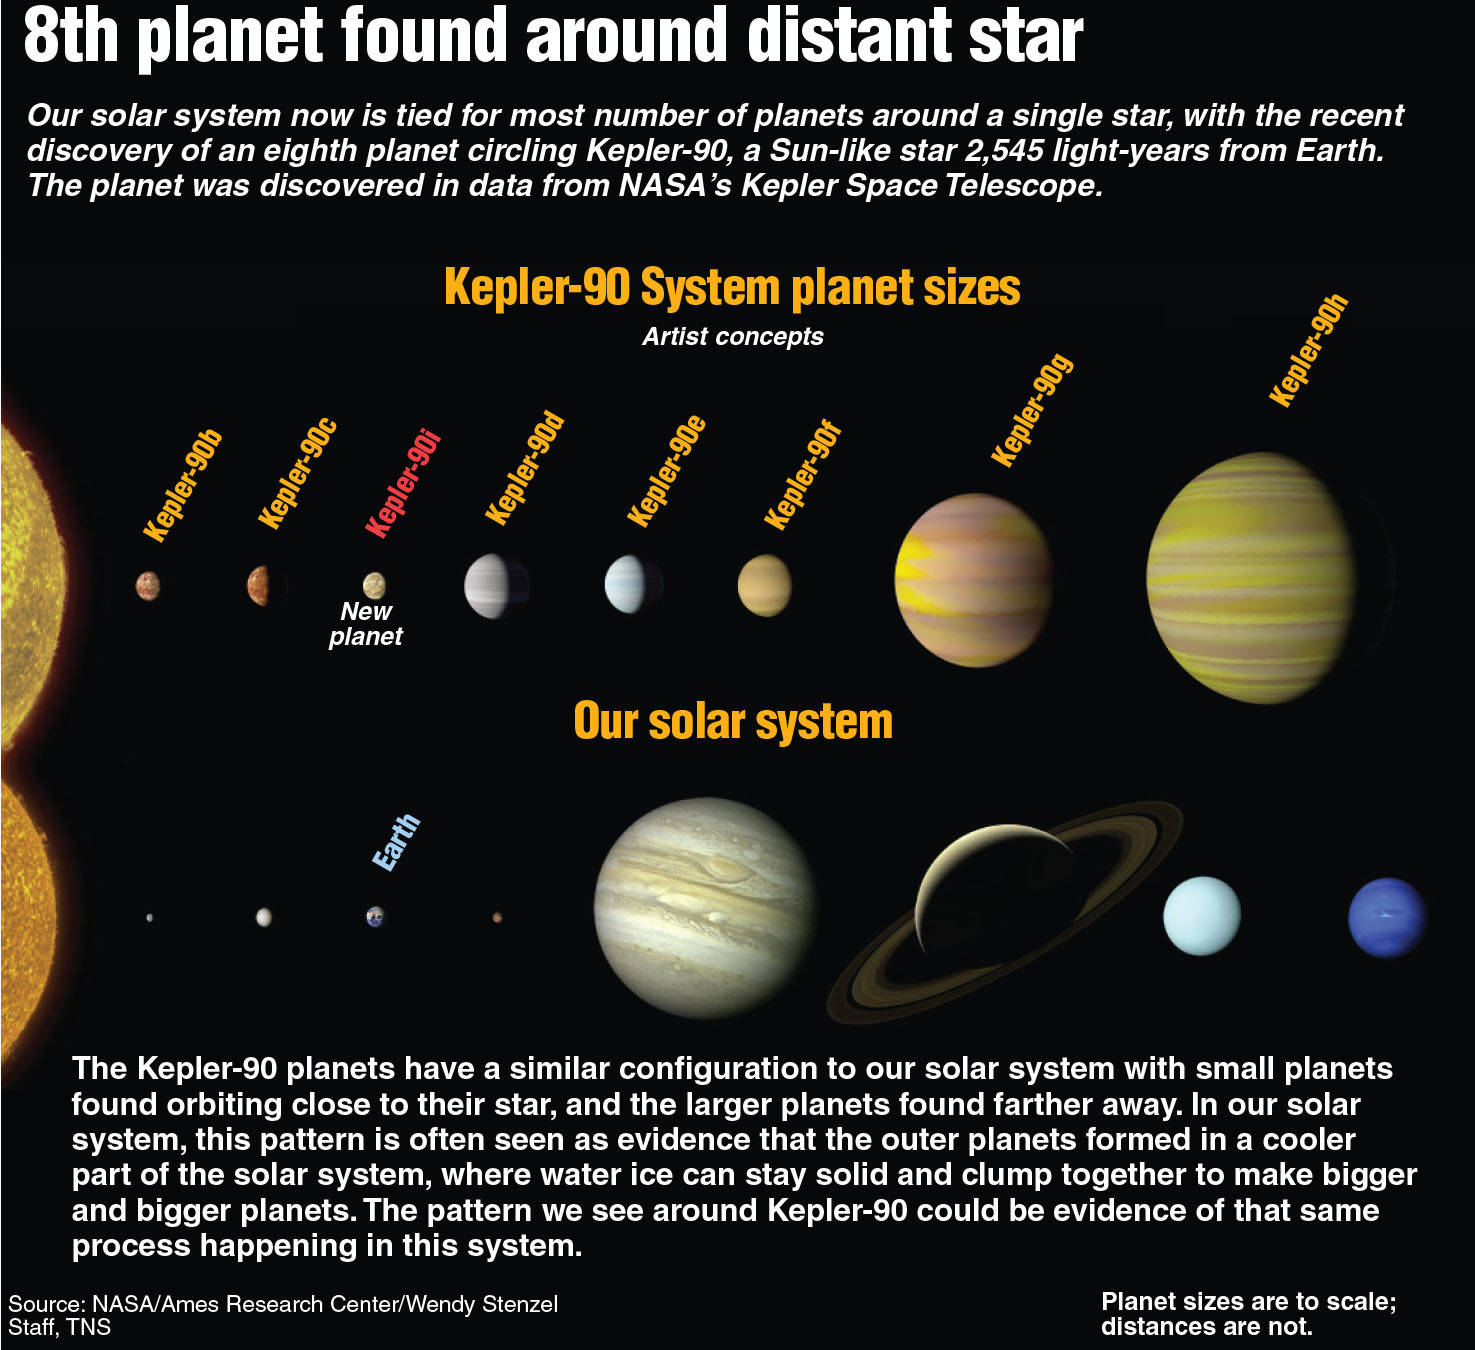 Scientists find miniature version of our solar system, with 8 planets ...